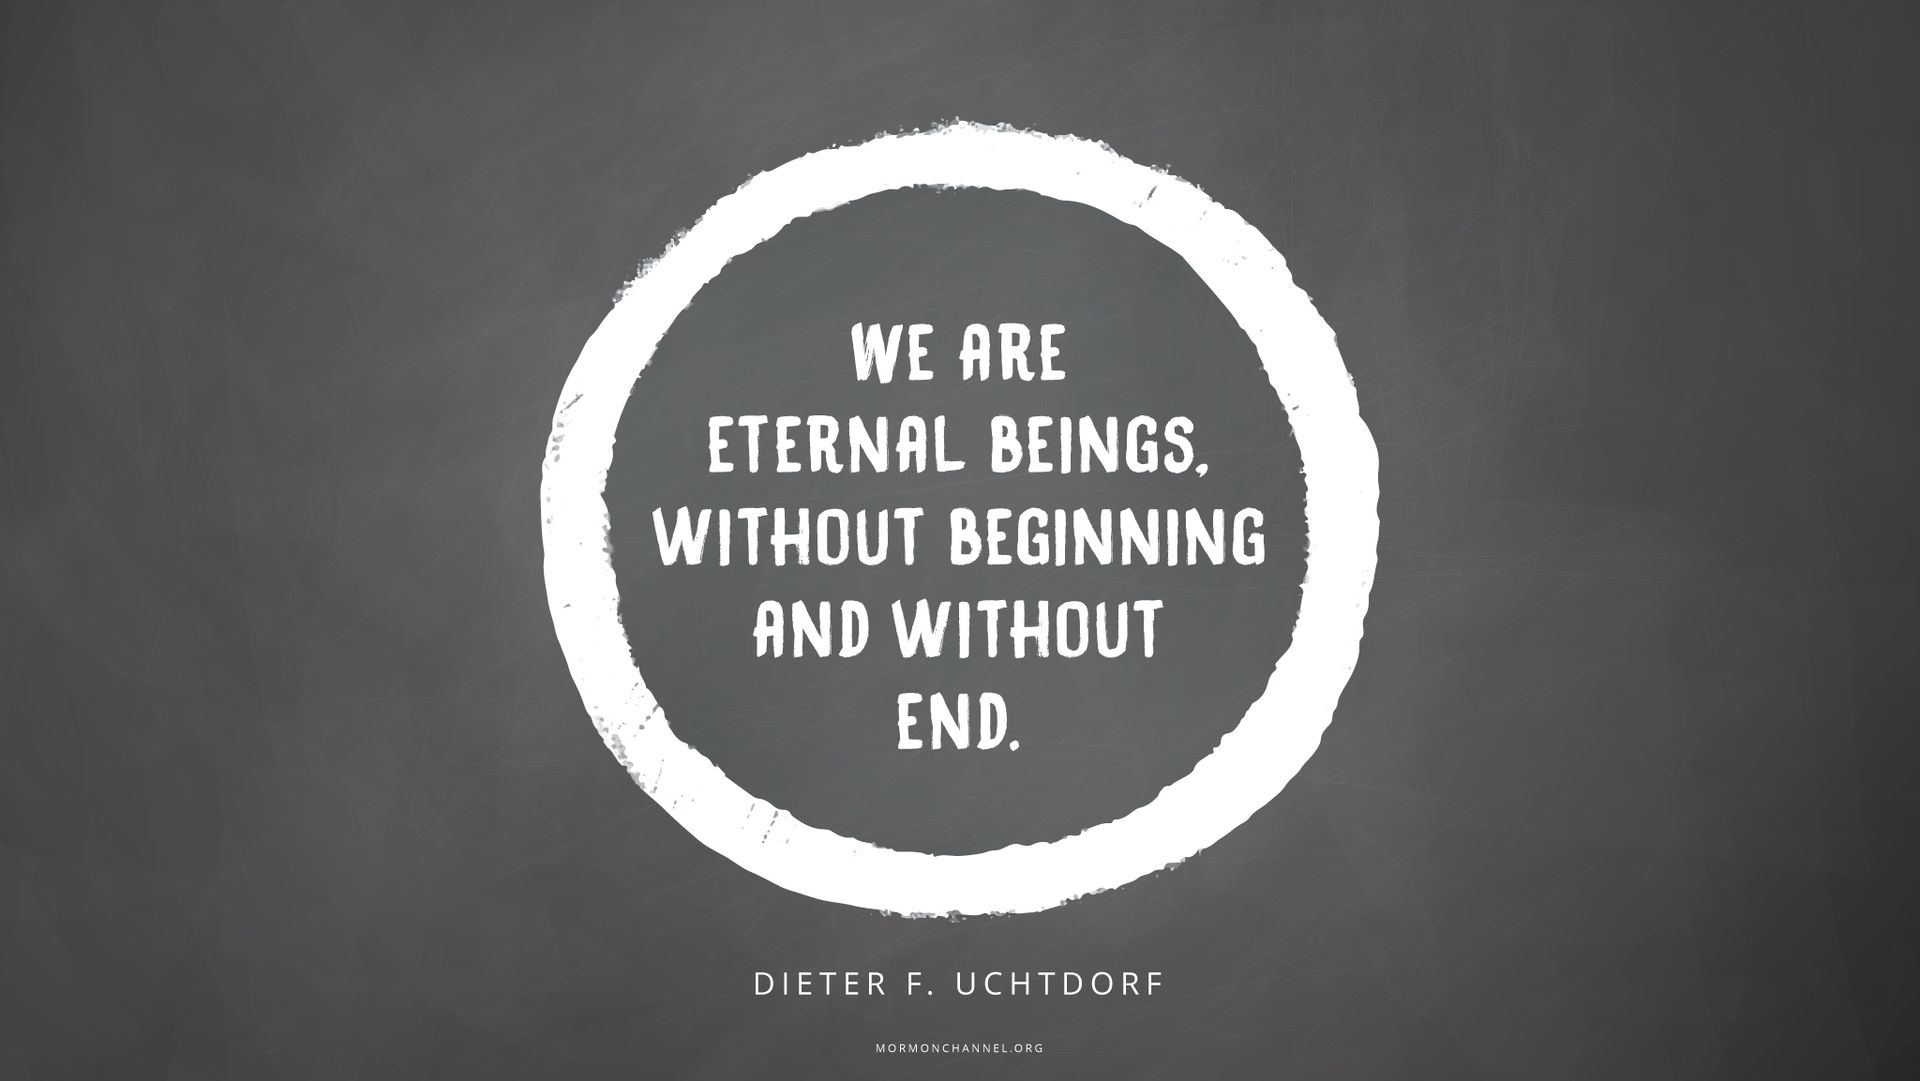 “We are eternal beings, without beginning and without end.”—President Dieter F. Uchtdorf, “O How Great the Plan of Our God!” © undefined ipCode 1.